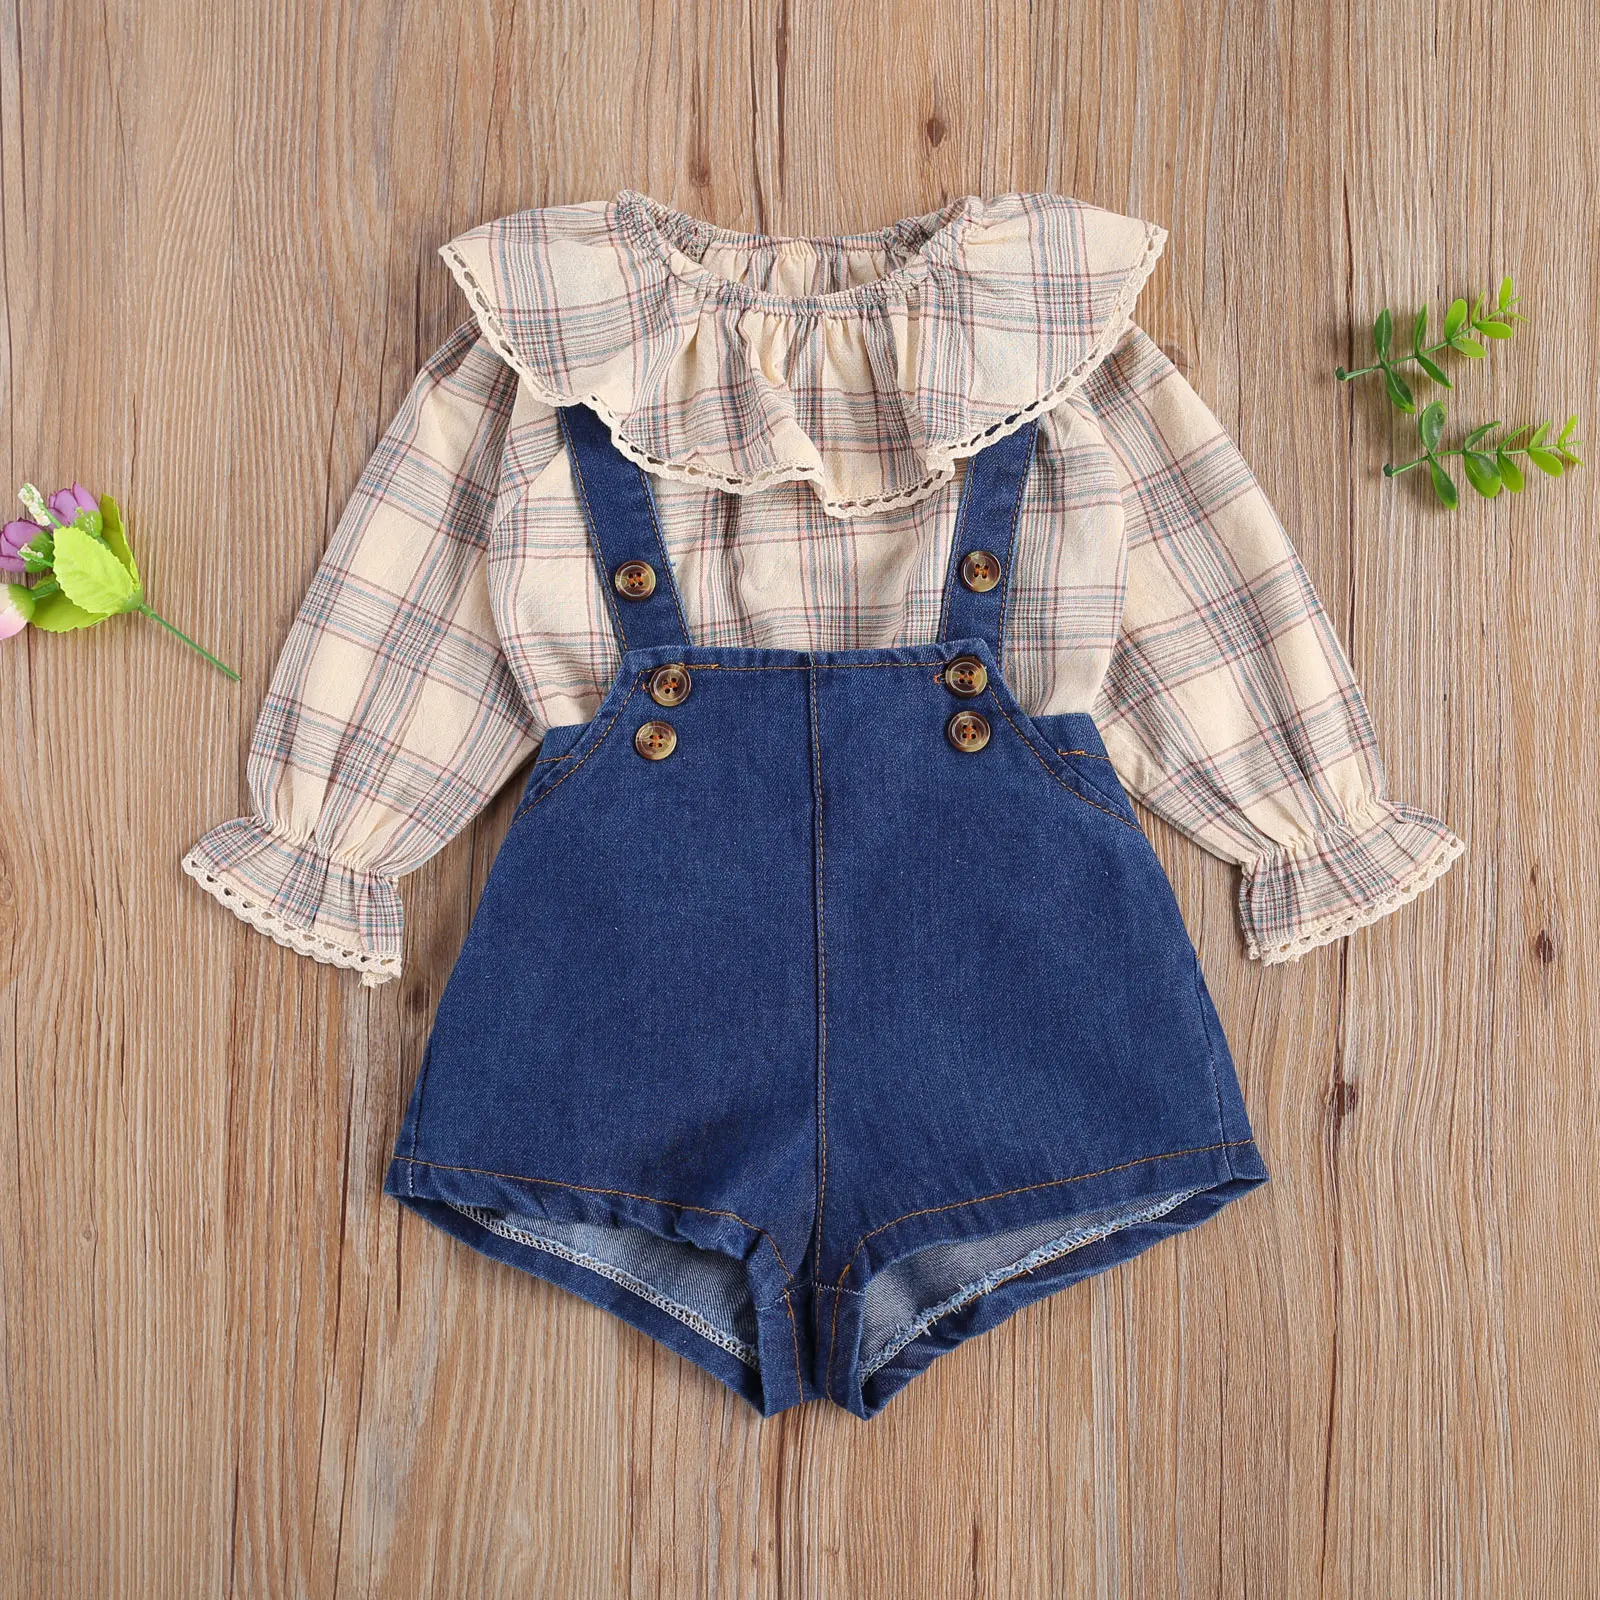 Ruffle Blouse and Overall Shorts Outfit - Momorii